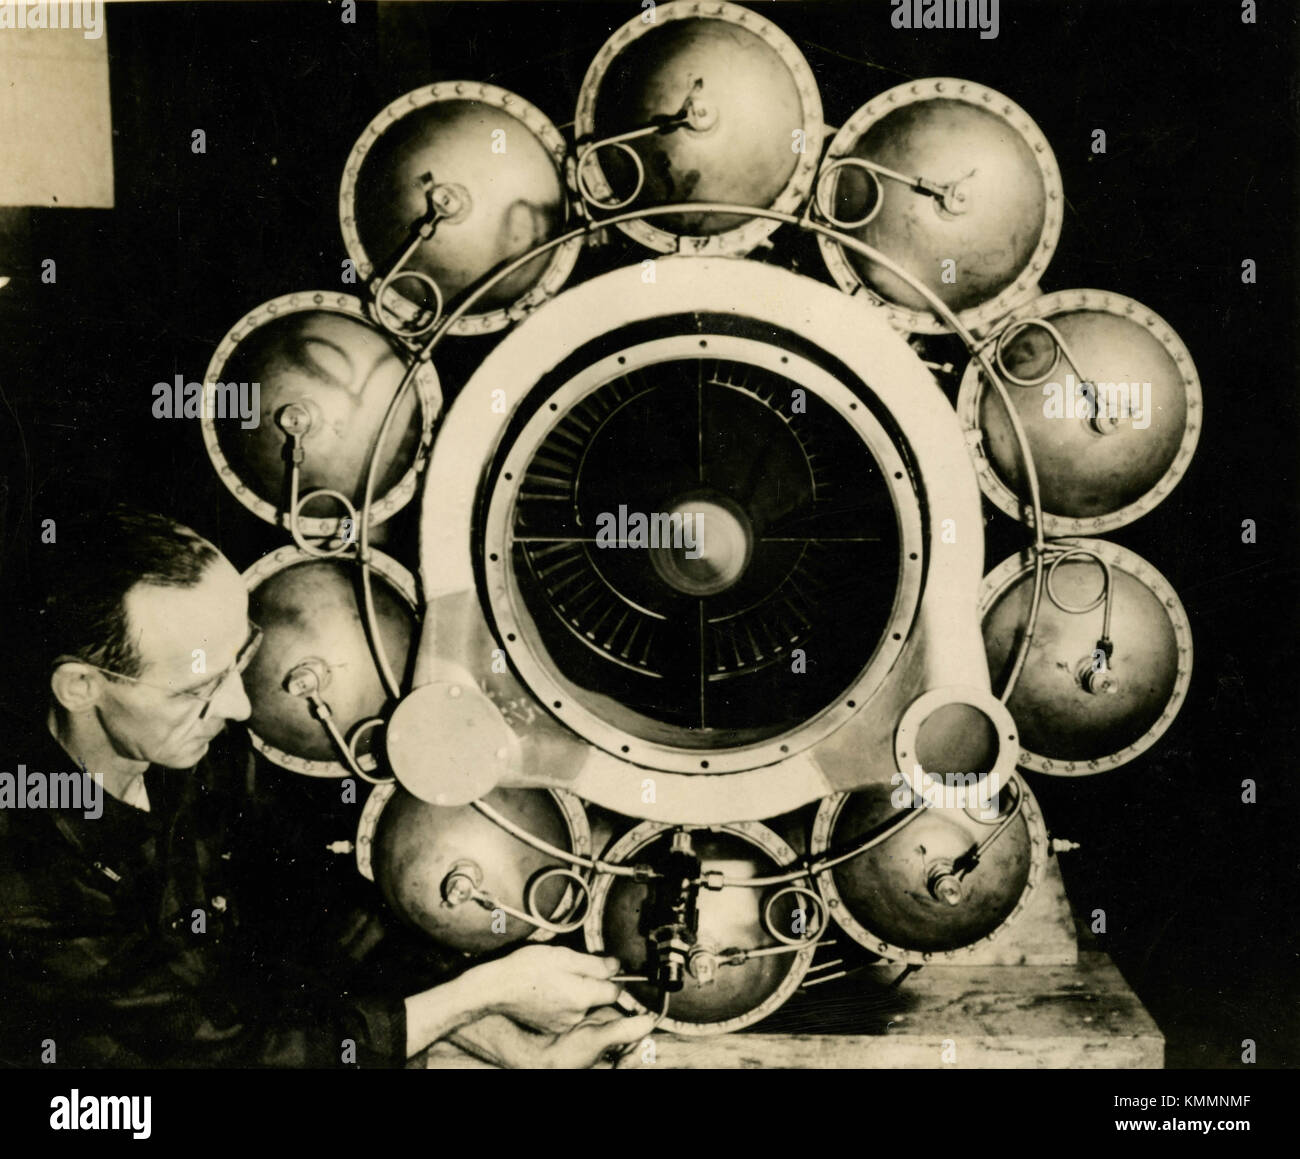 The Heart of the General Electric Jet Turbine Engine, USA 1945 Stock Photo